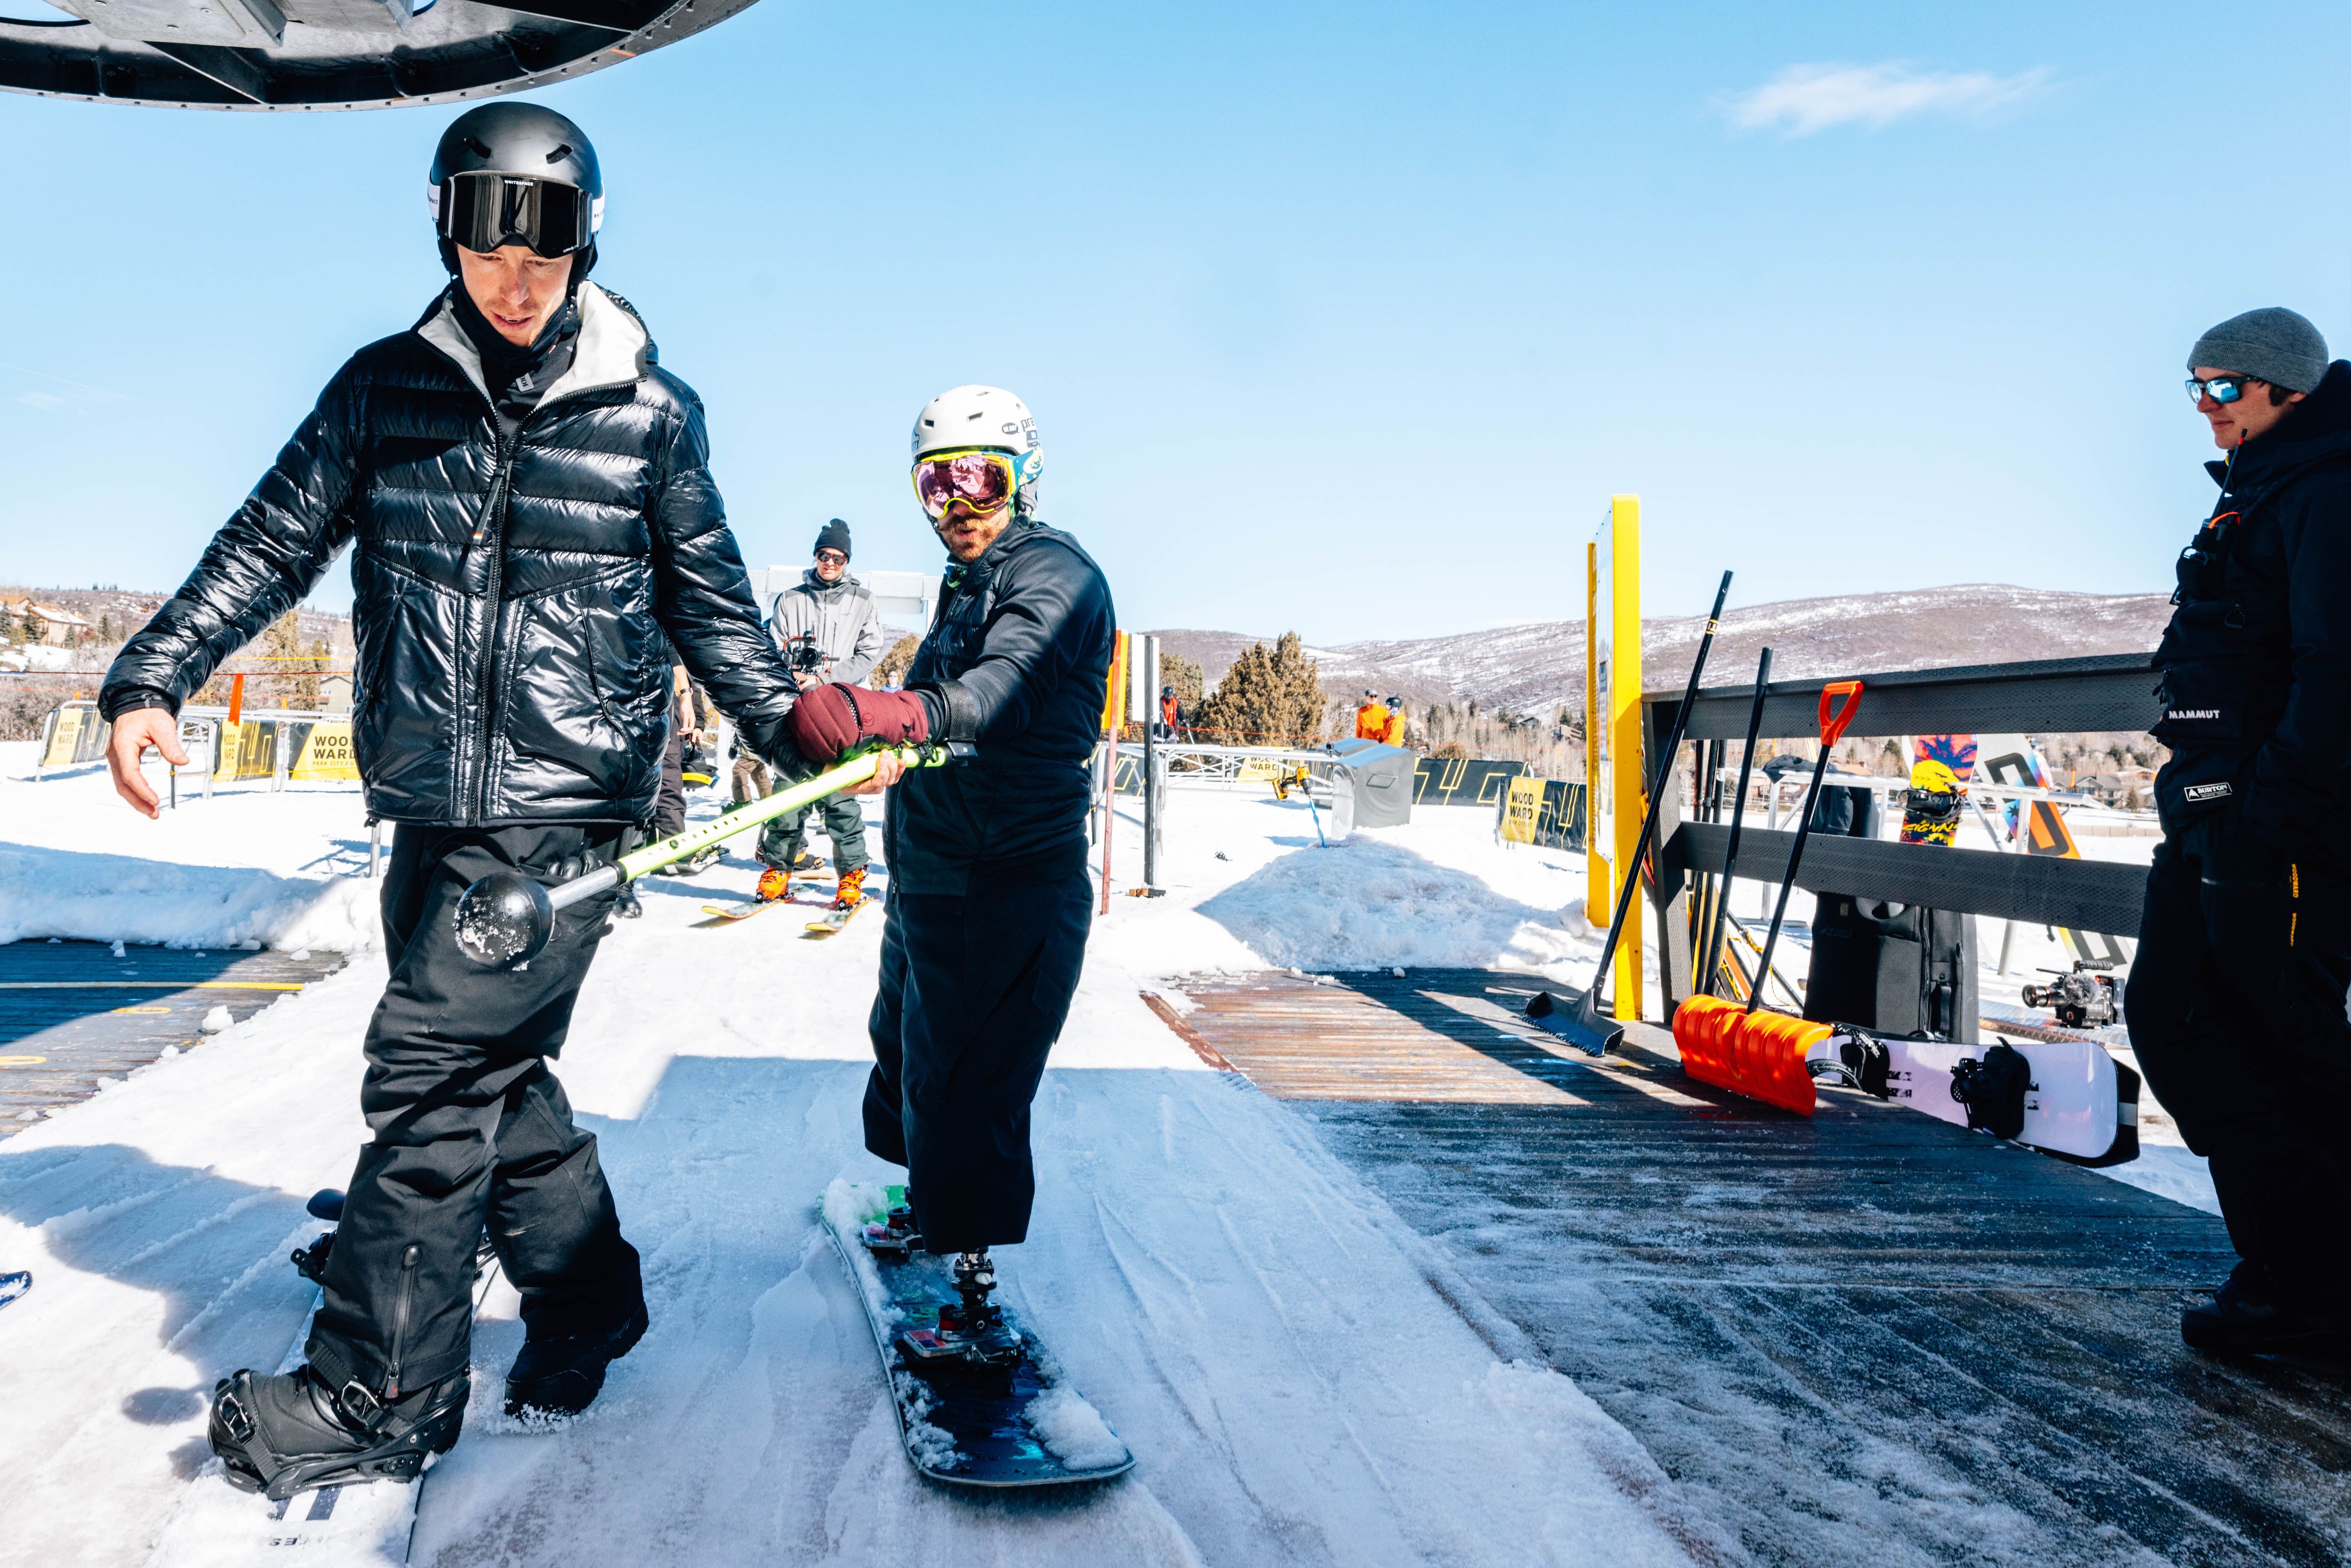 Shaun White plans to push the limits of snowboarding in 2013